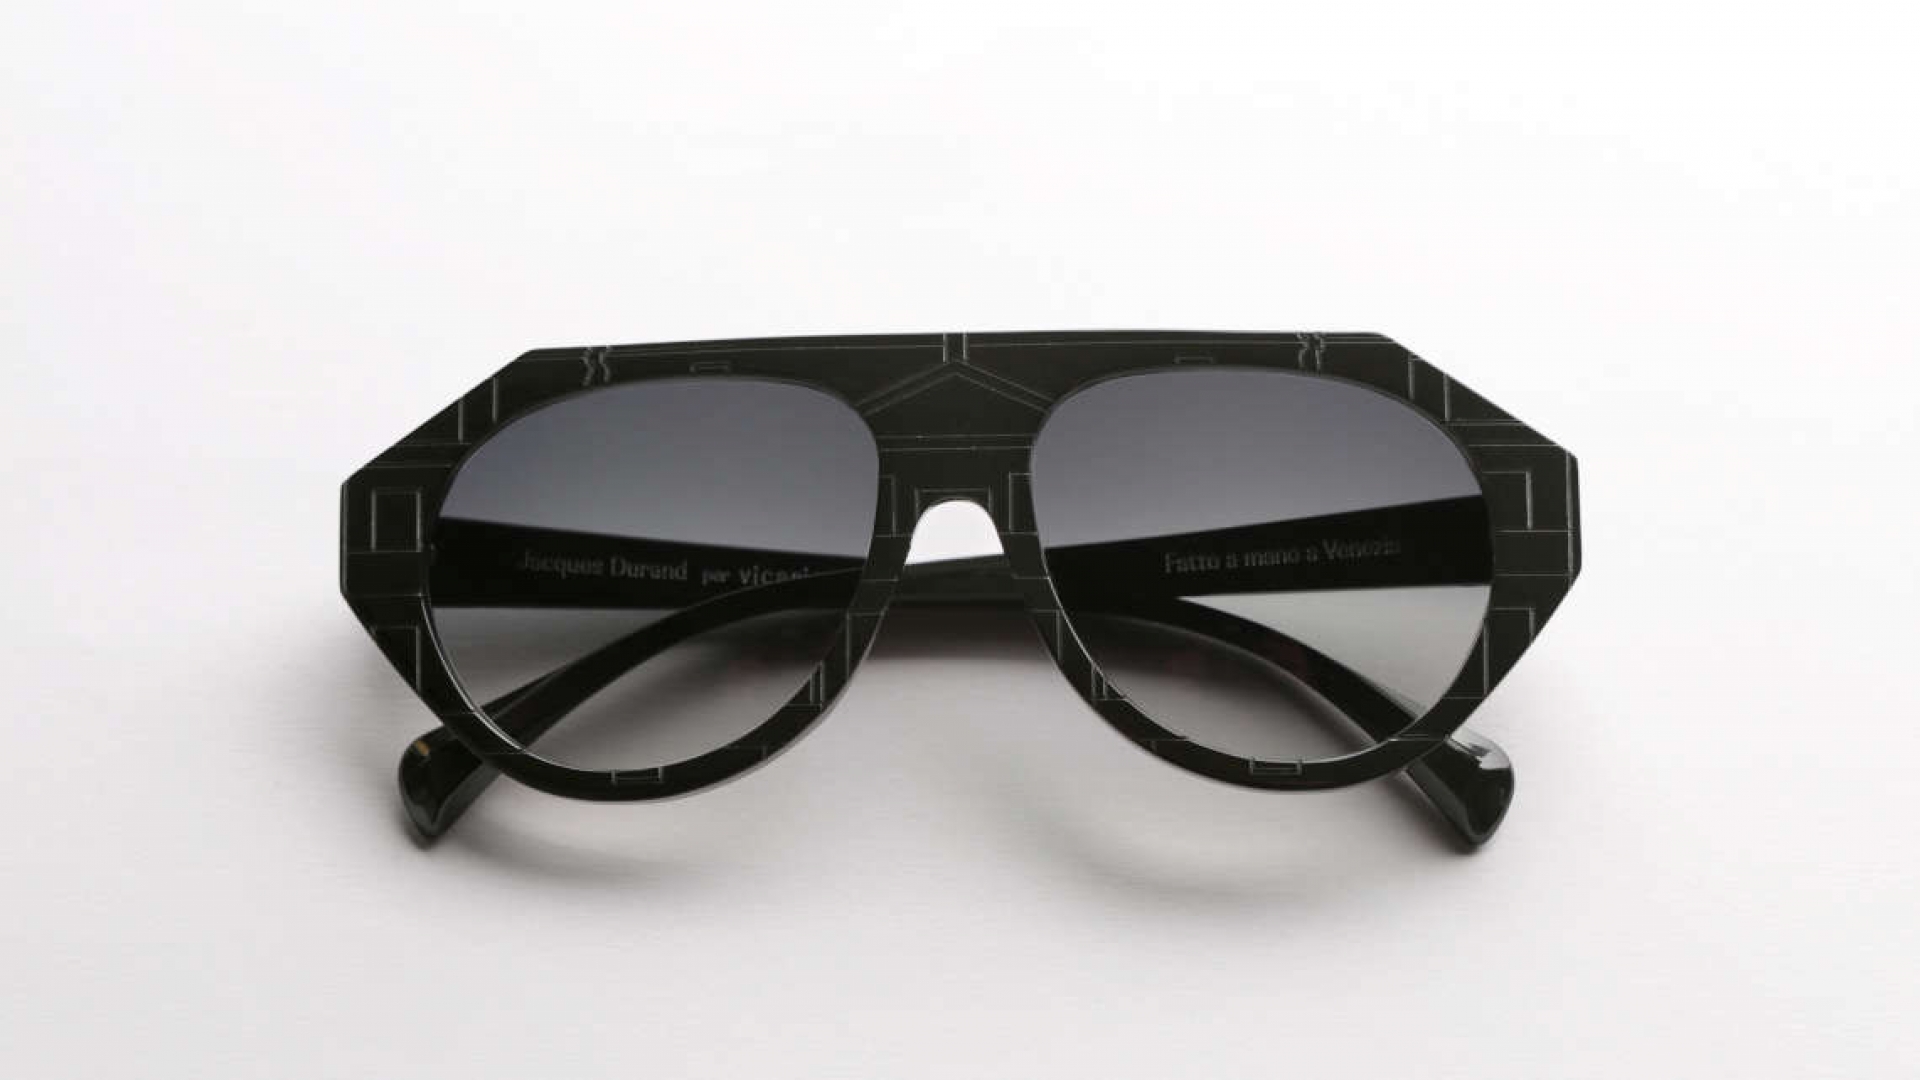 Vicario Cinque Eyewear in collaboration with Jacques Durand